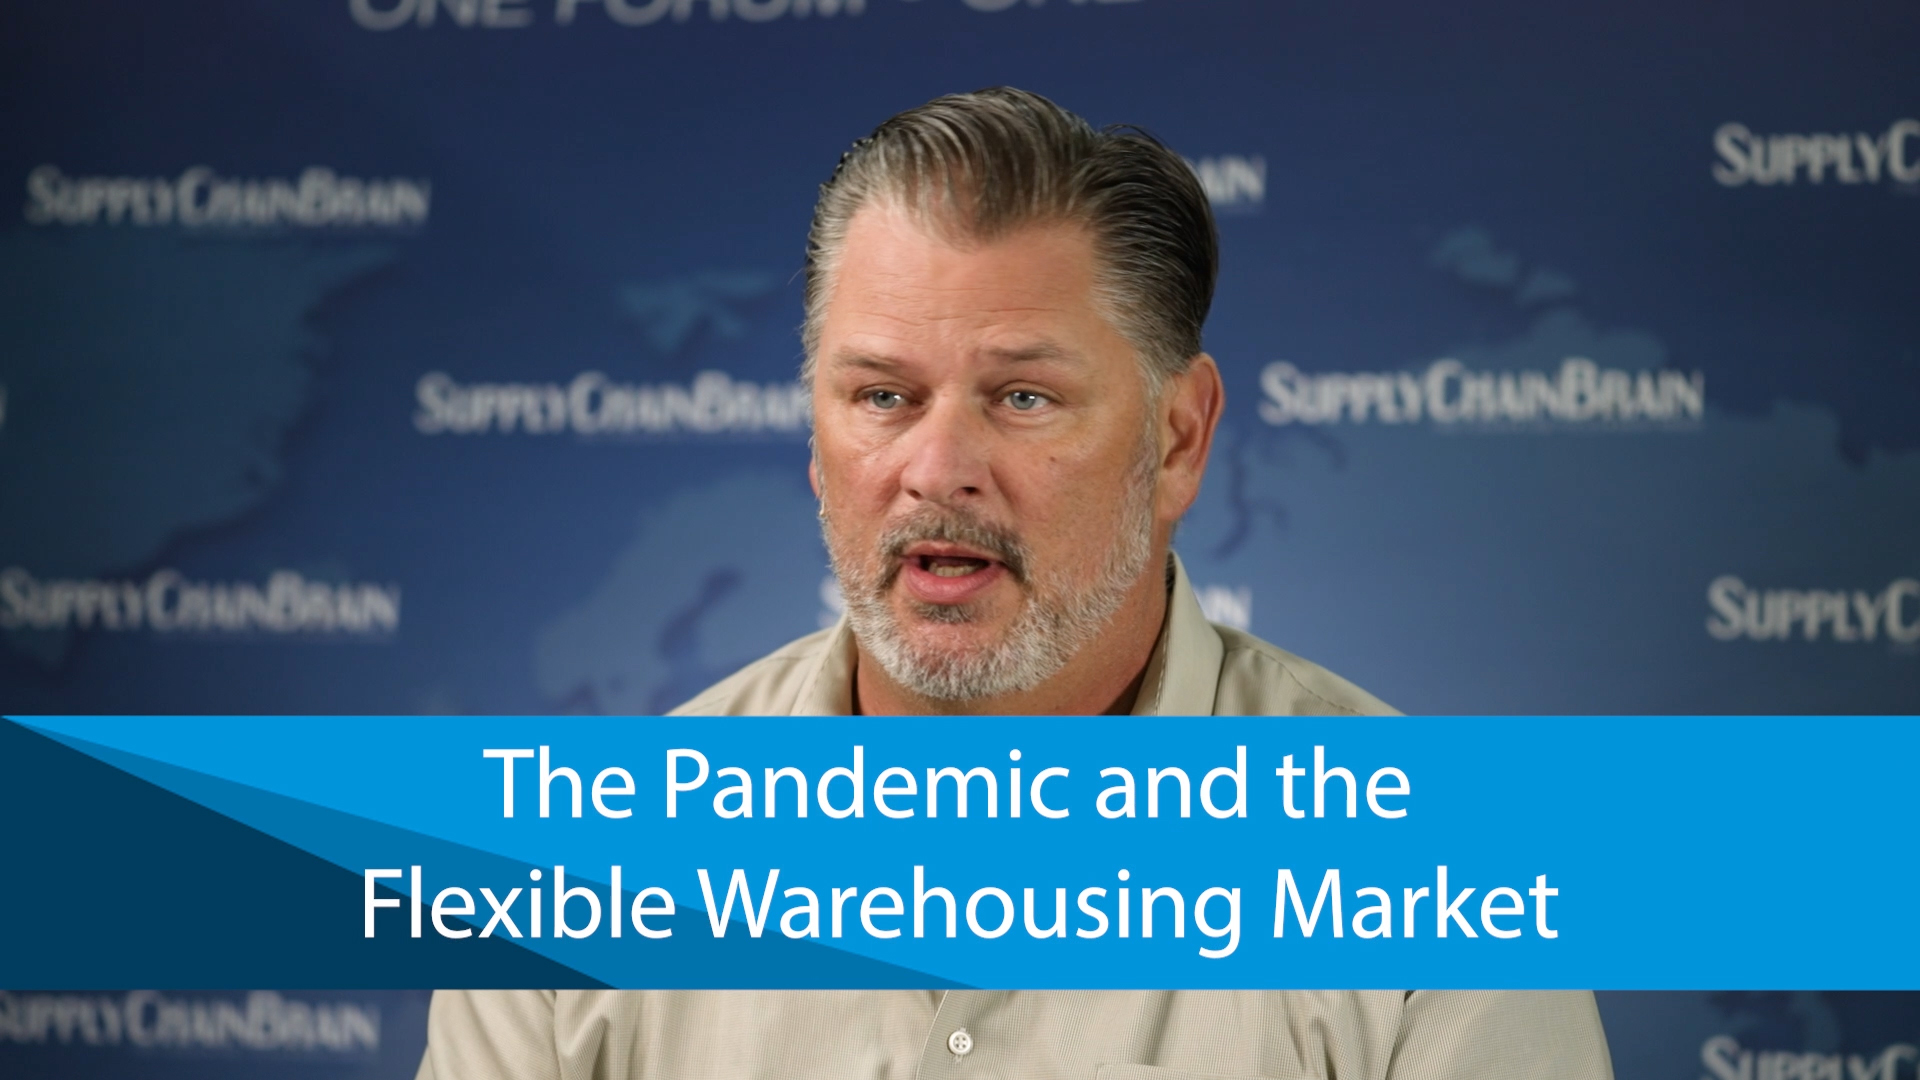 The pandemic and the flexible warehousing market